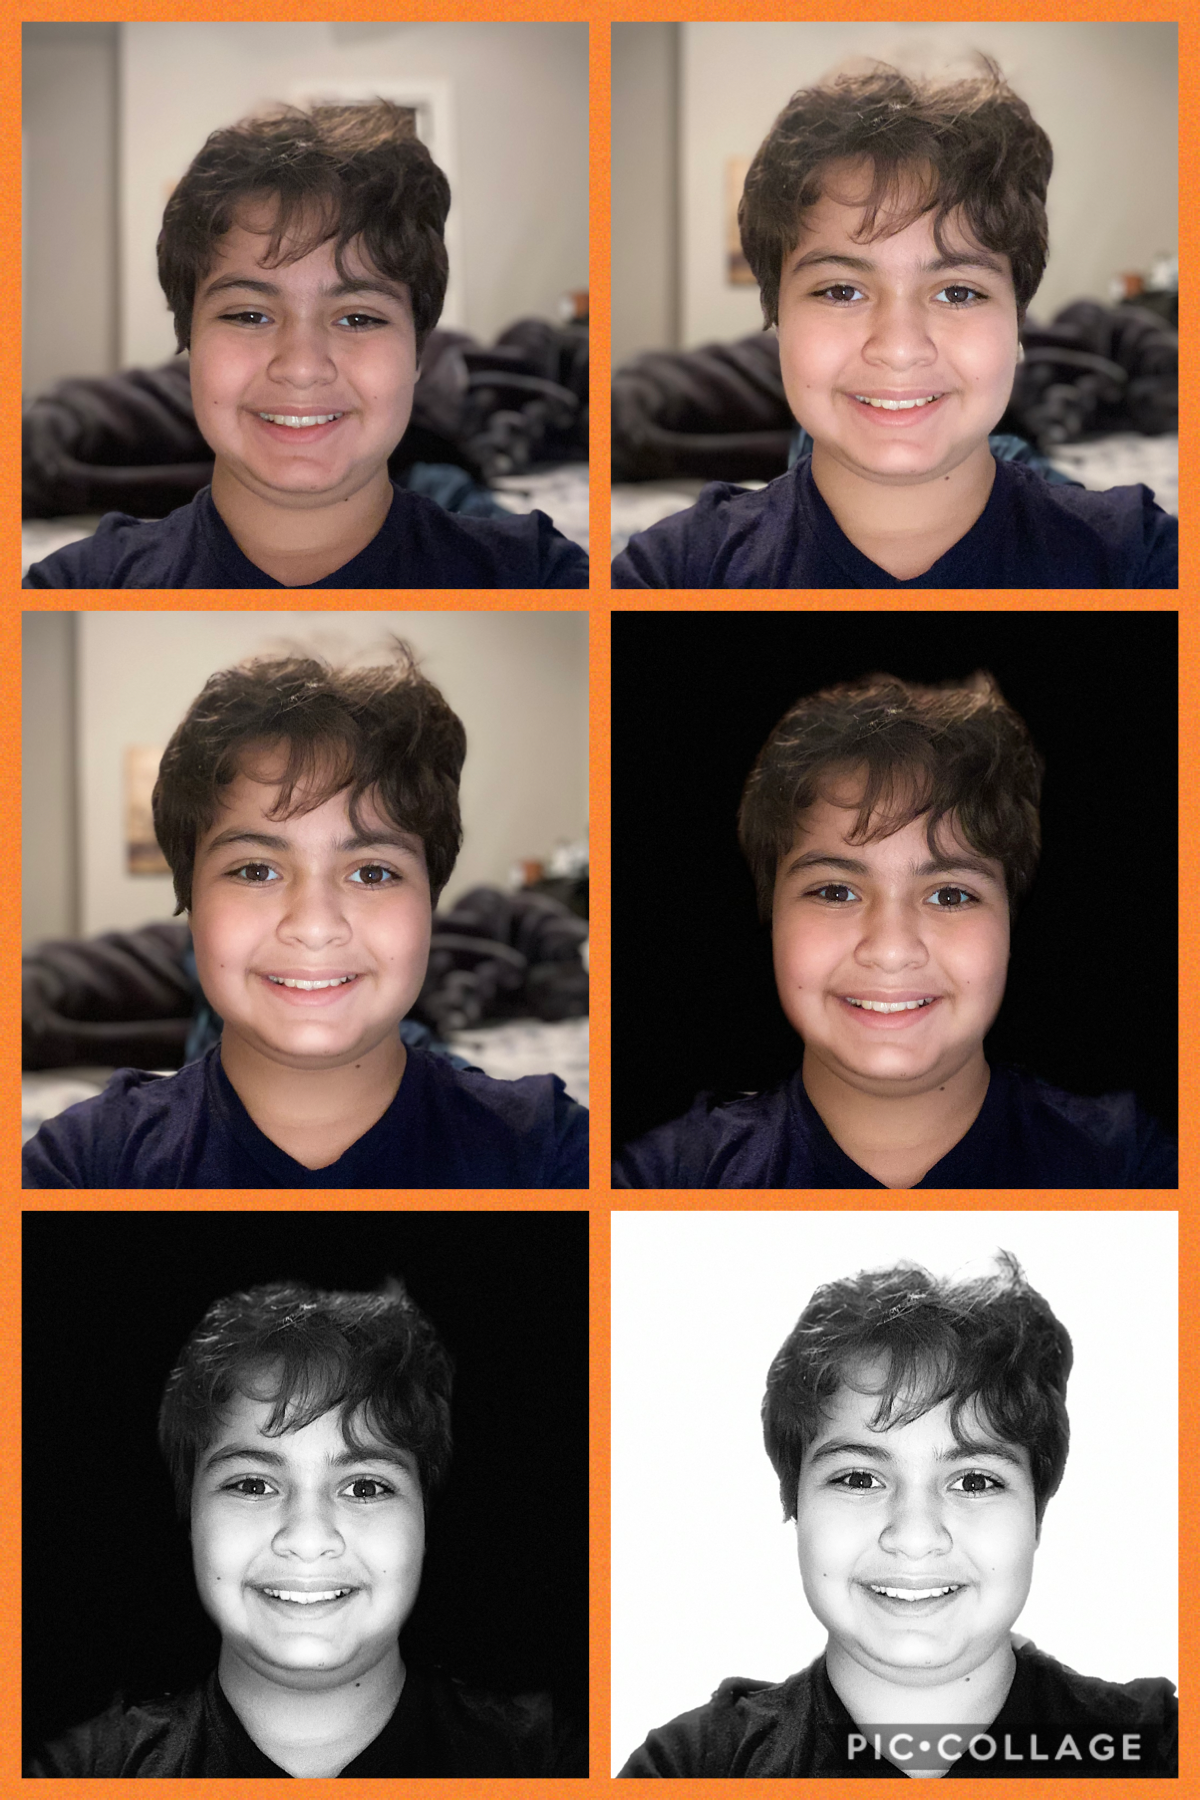 These are all the Portrait Lighting effects on my iPhone.